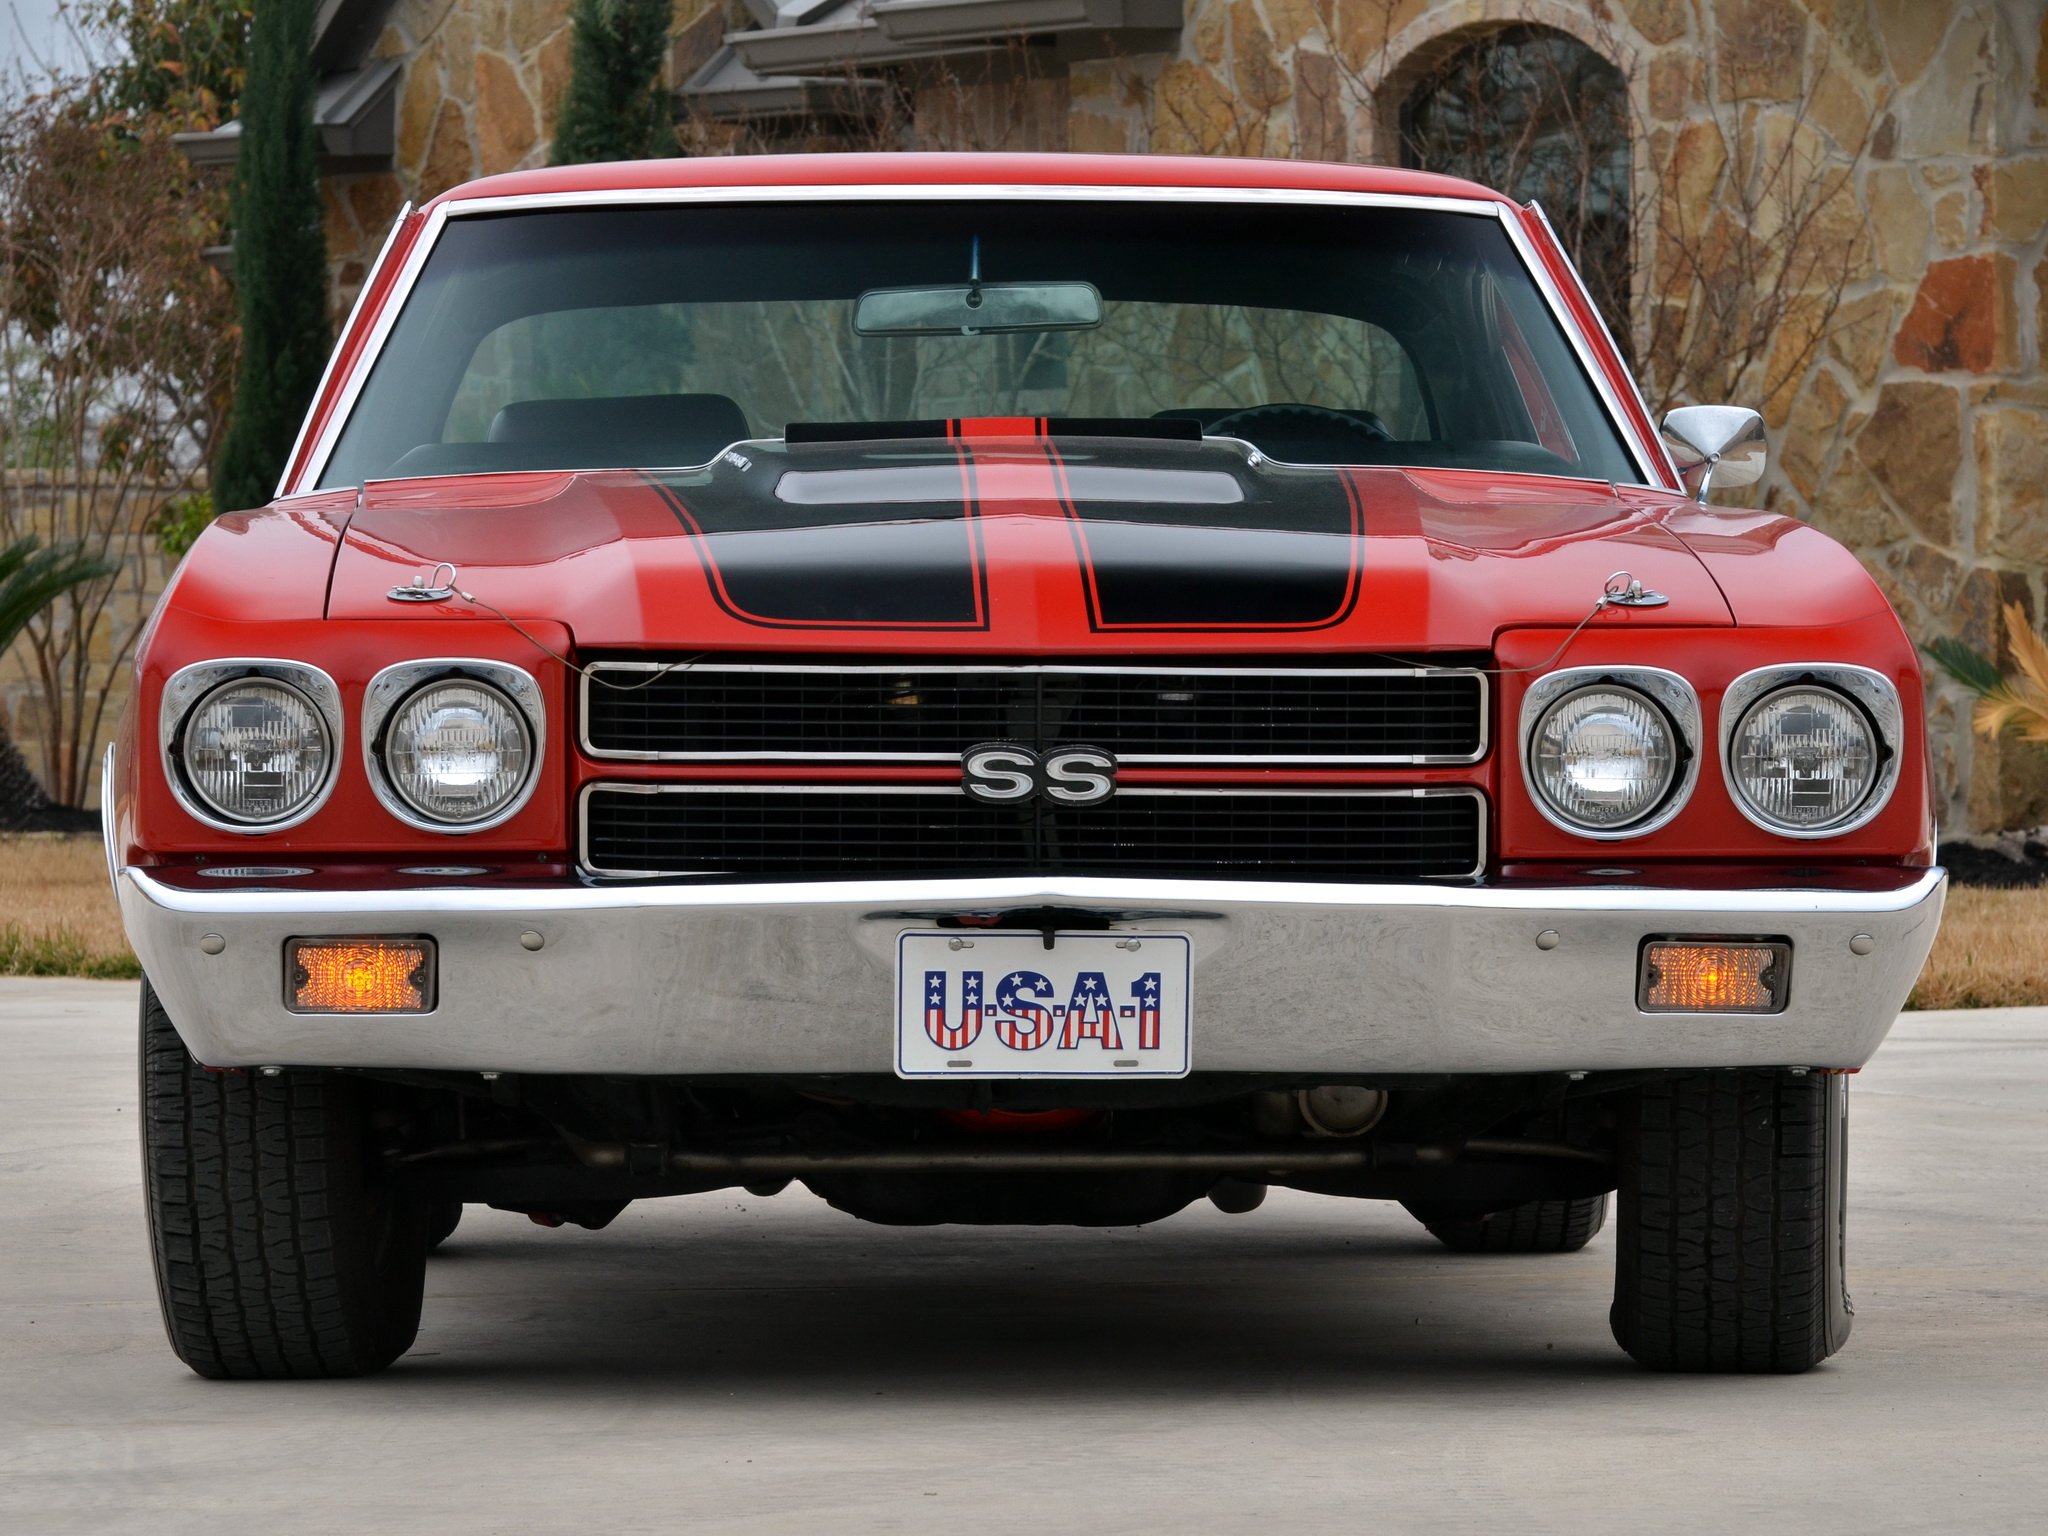 1970, Chevrolet, Chevelle, S s, 396, Hardtop, Coupe, Muscle, Classic Wallpaper